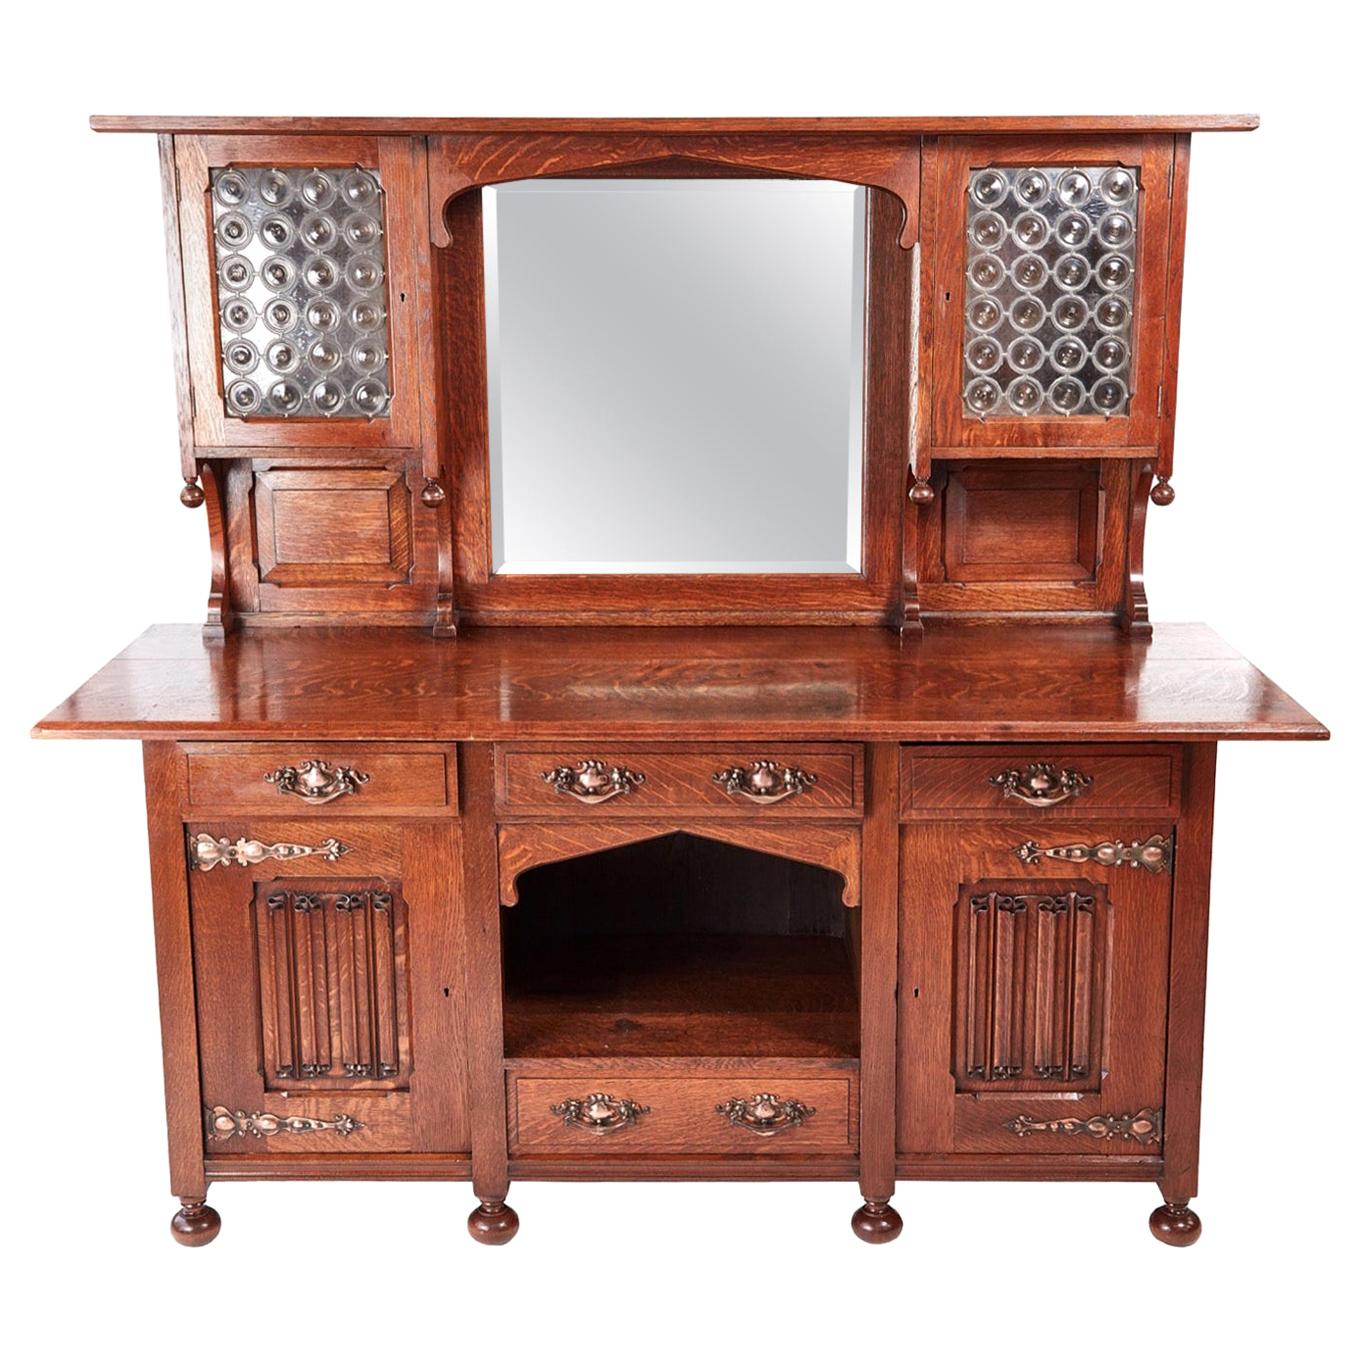 Outstanding Quality Antique Victorian Oak Arts & Crafts Sideboard For Sale